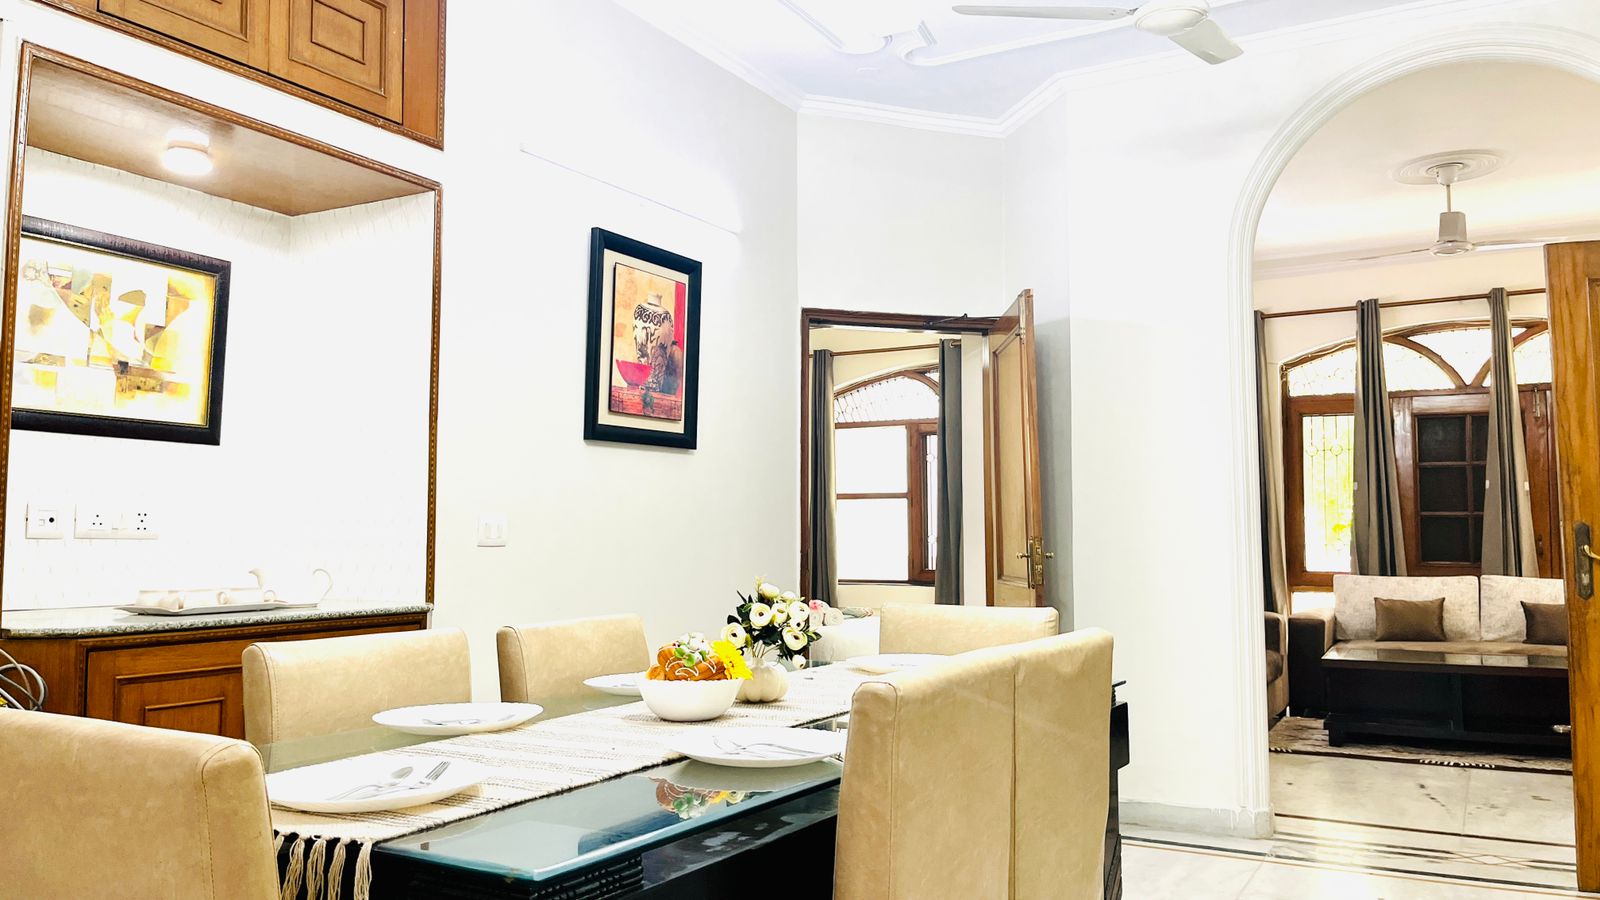 The city of Hyderabad service apartments provides excellent and reasonably priced